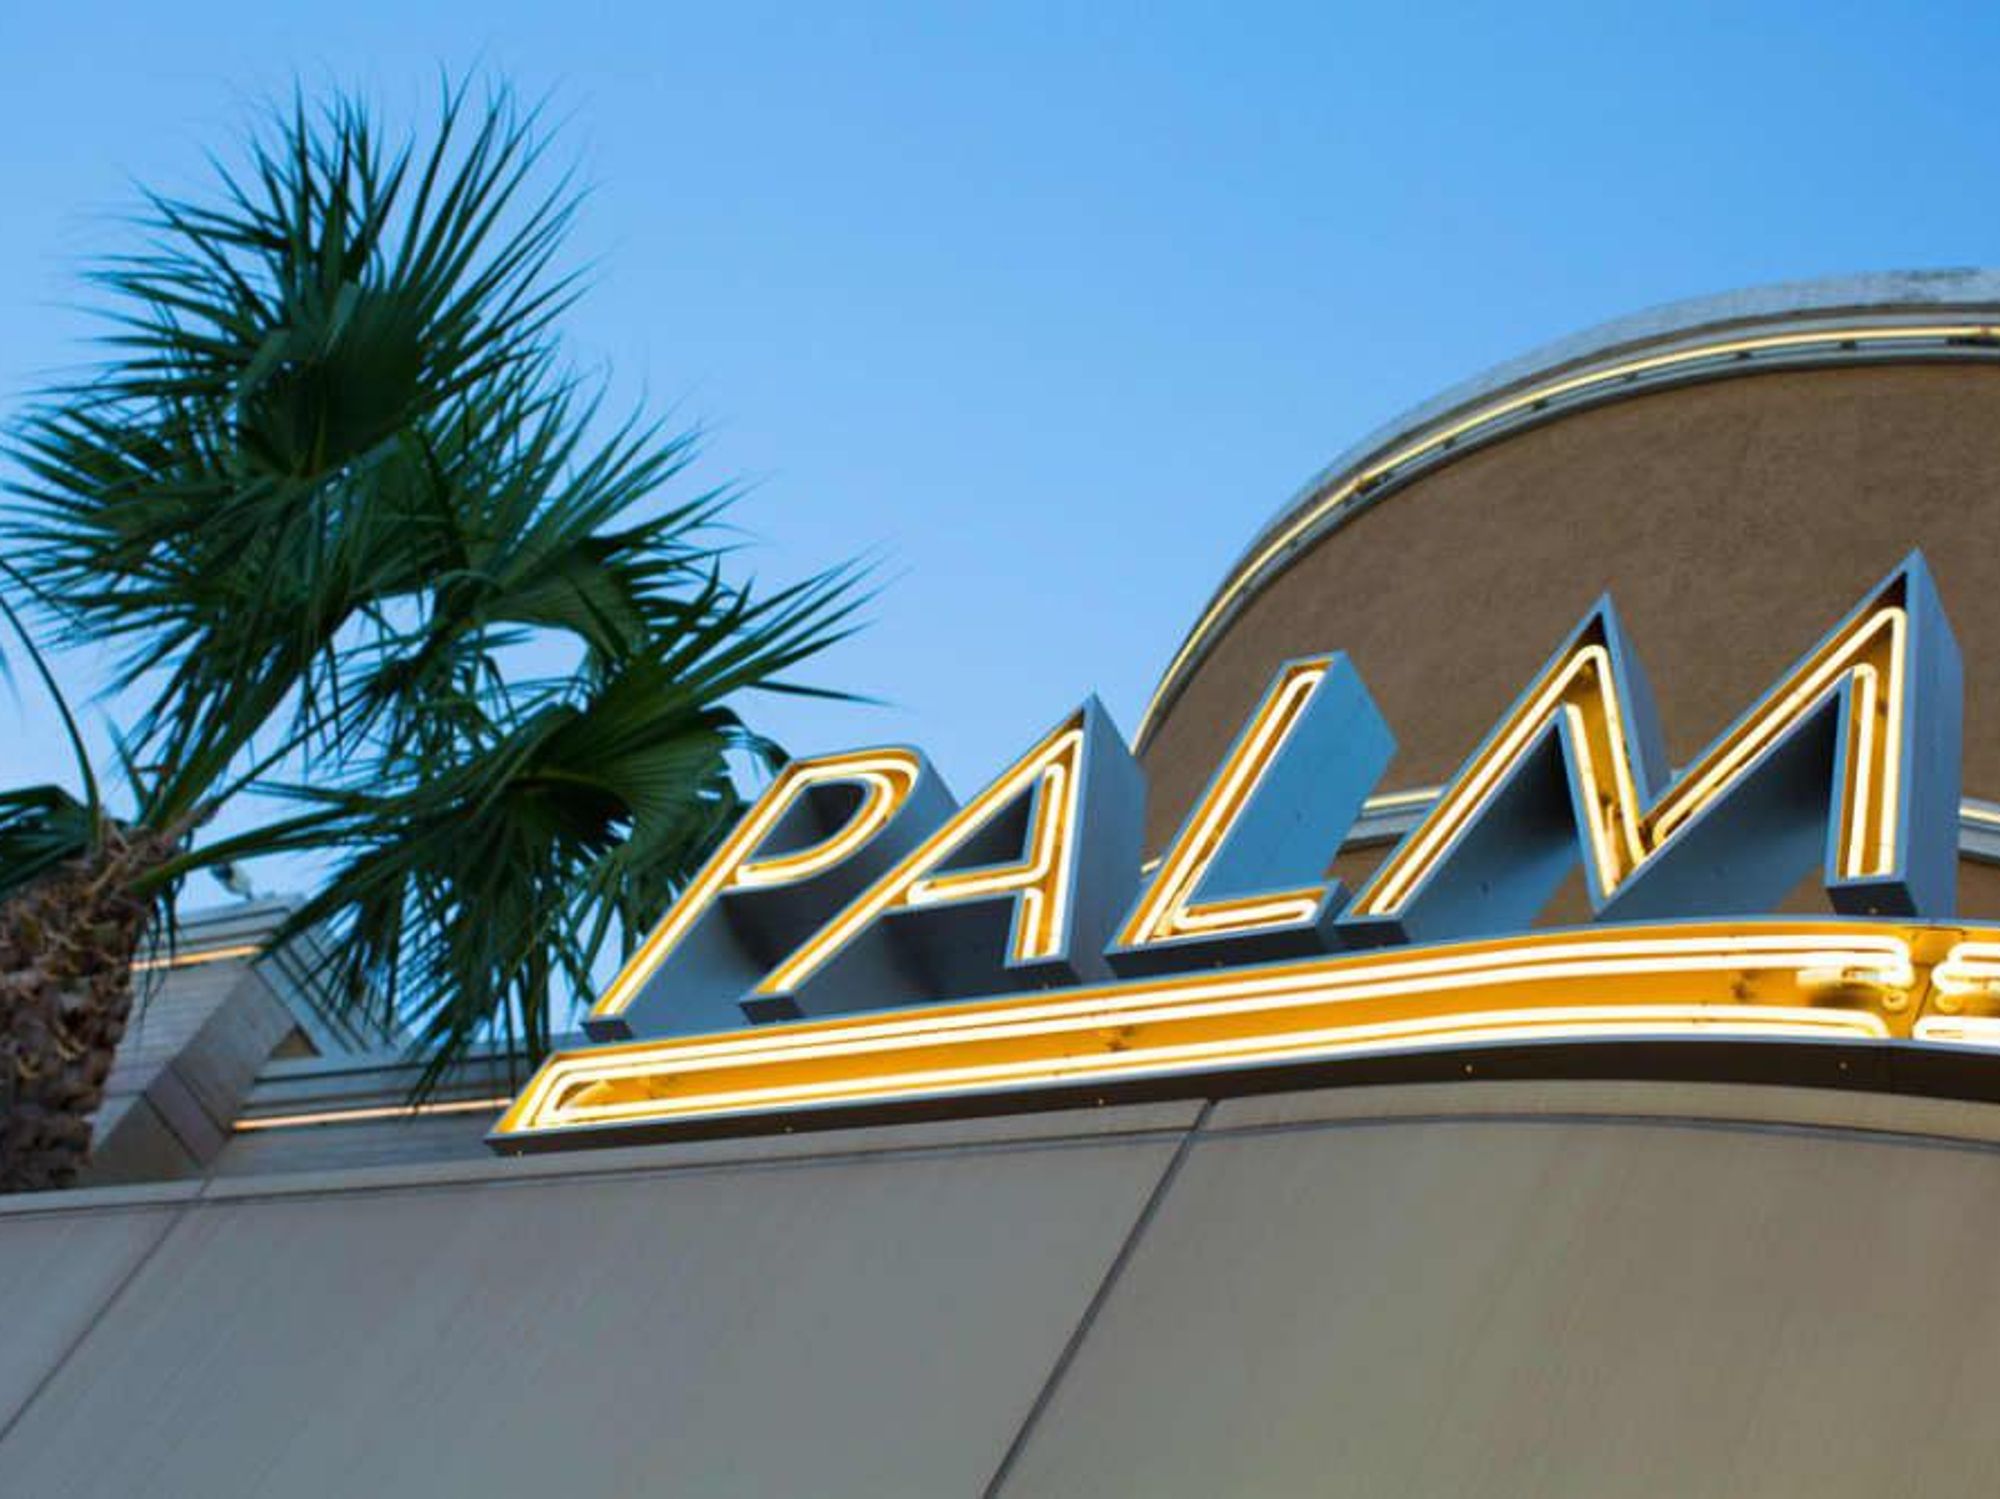 The Palm marquee